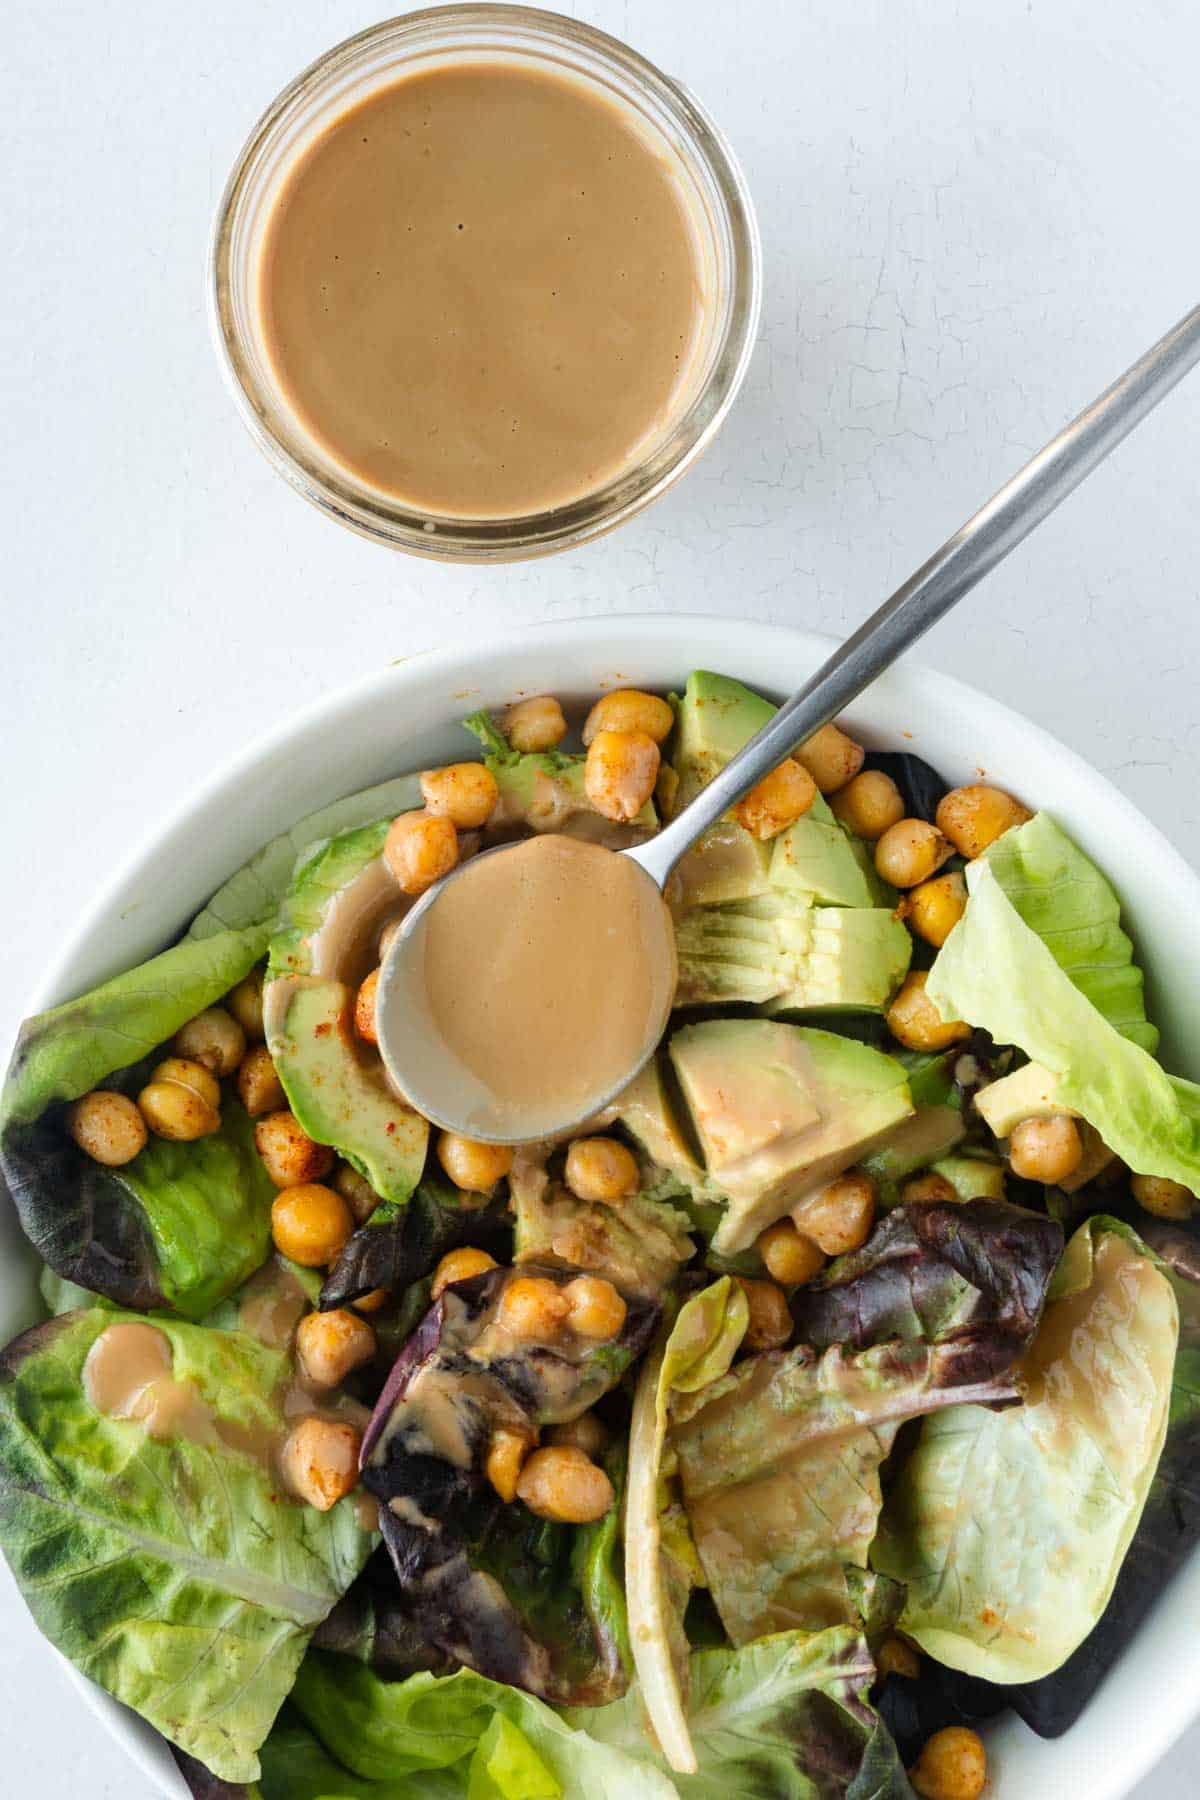 Healthy homemade balsamic vinaigrette dressing in a glass storage jar next to a bowl of salad.